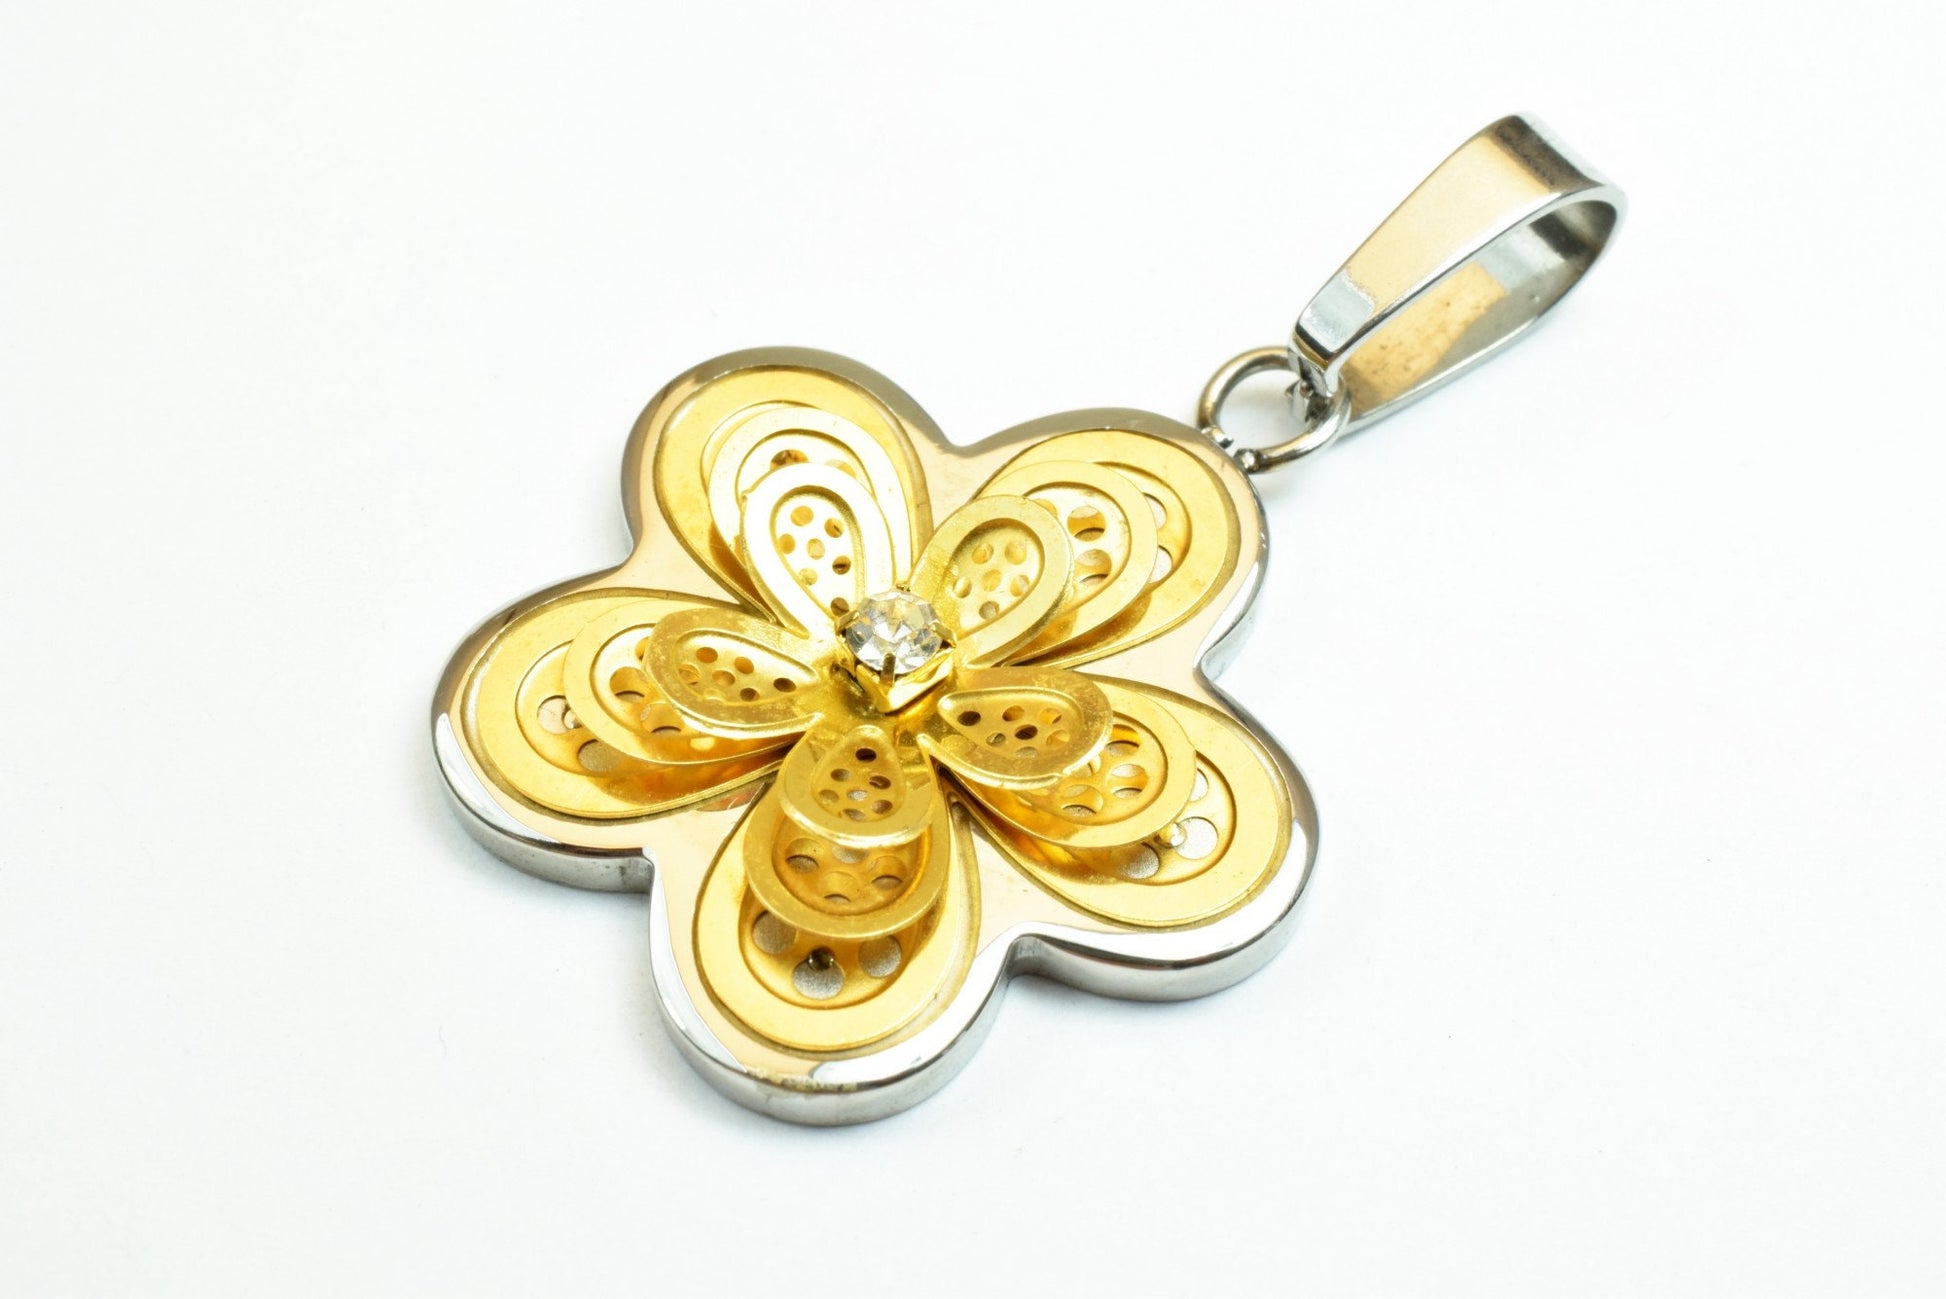 18K Gold Filled Flower Stainless Steel Pendants Size 32x27mm With Rhinestone CZ Cubic Zirconia For Jewelry Making